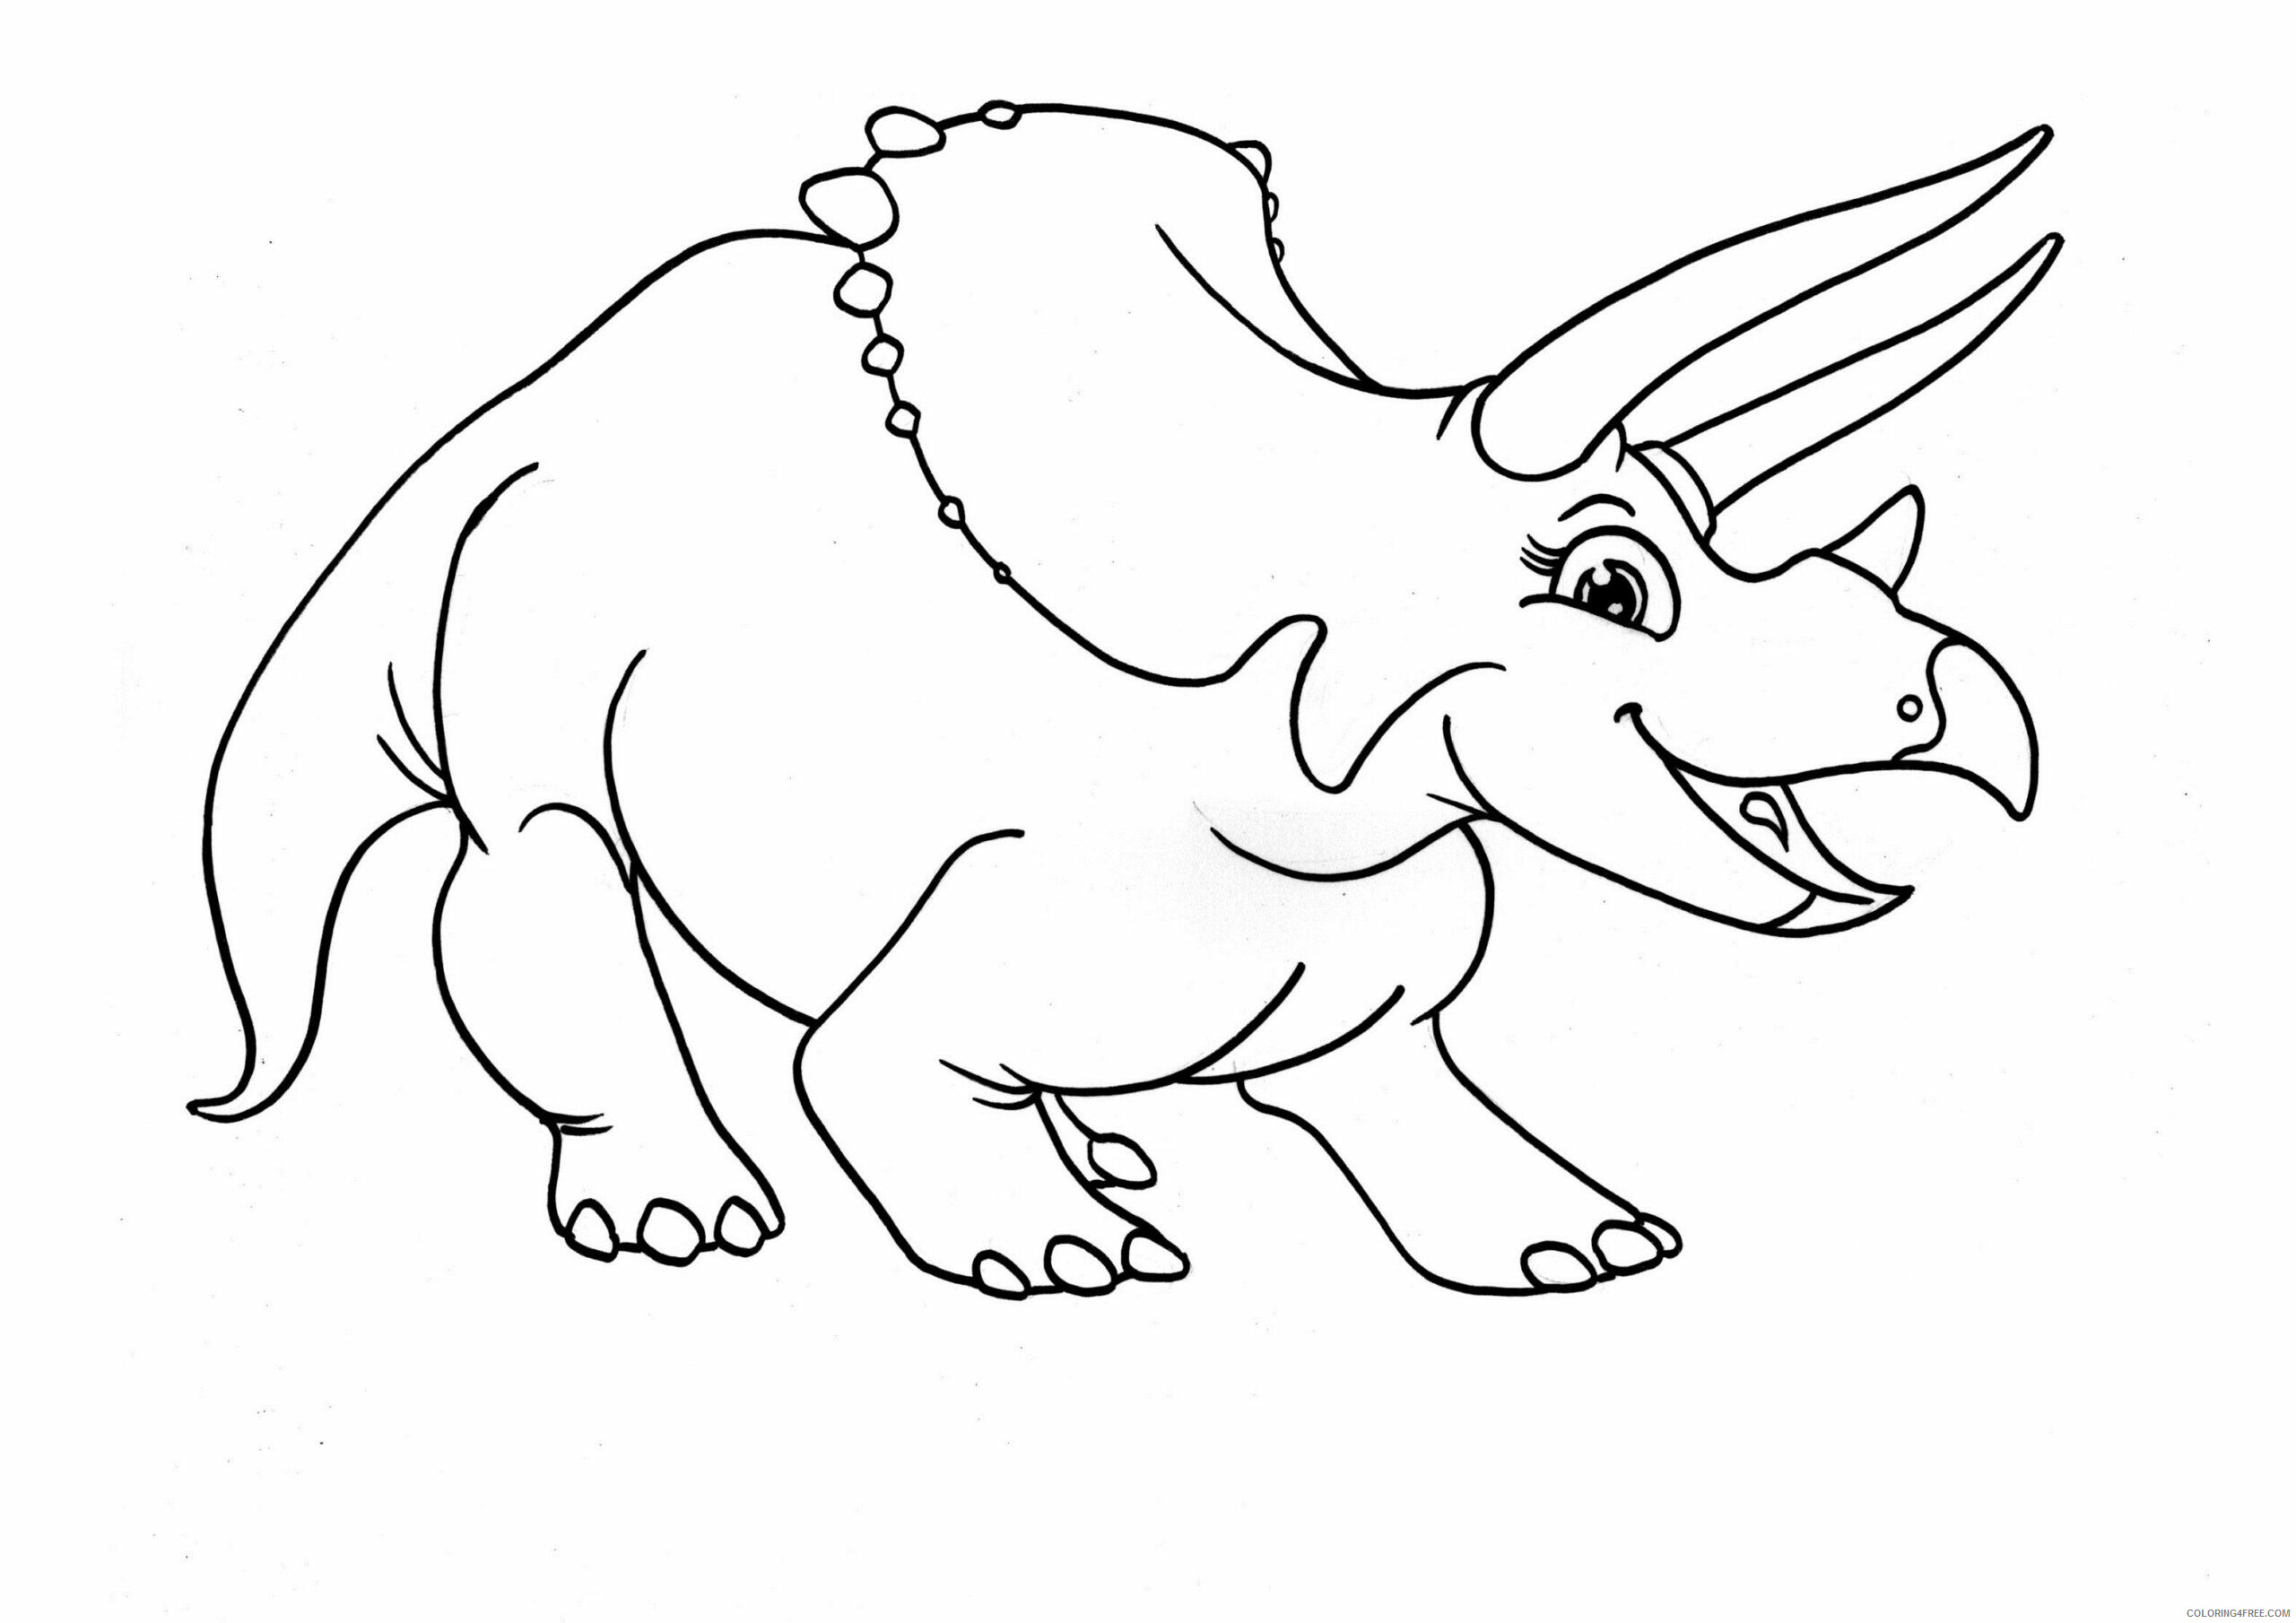 Triceratops Coloring Pages Animal Printable Sheets Free Triceratops 2021 4837 Coloring4free